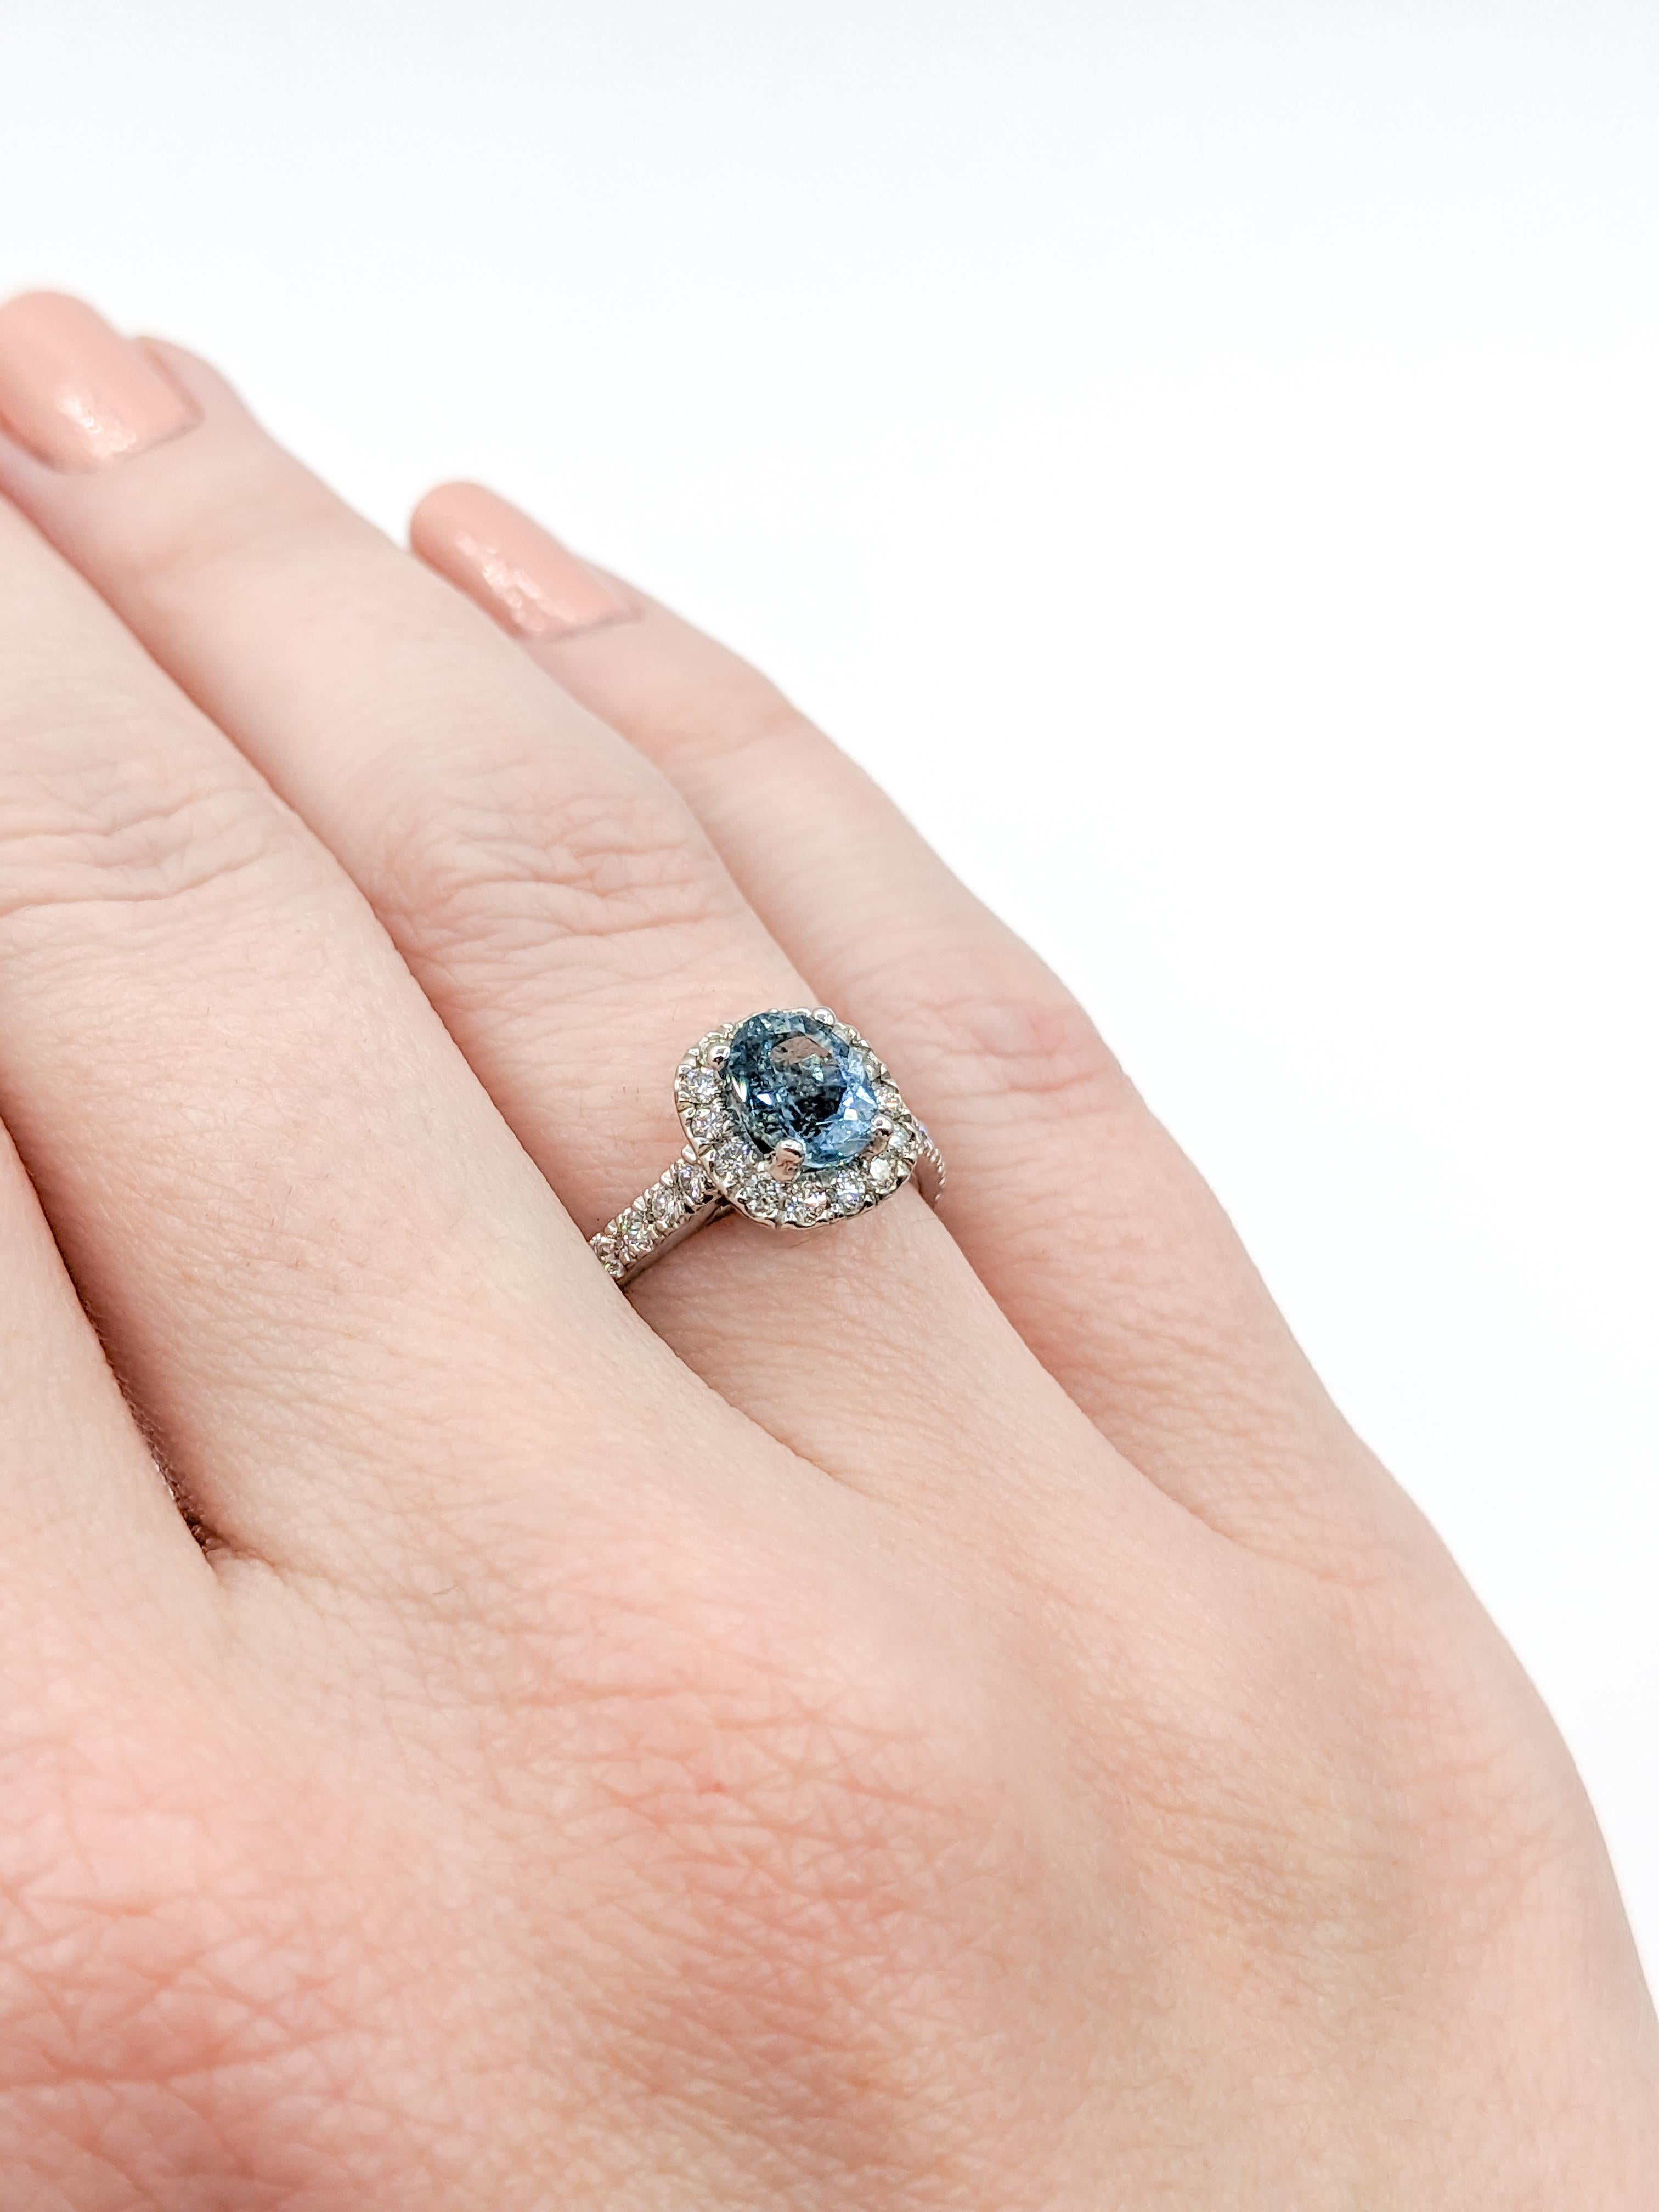 Dreamy Natural Aquamarine & Diamond Halo Ring

This stunning piece of jewelry is a 14k white gold ring adorned with .33 carat total weight round diamonds. The diamonds are of G color and SI1 clarity, adding to the ring's sparkle. Along with the